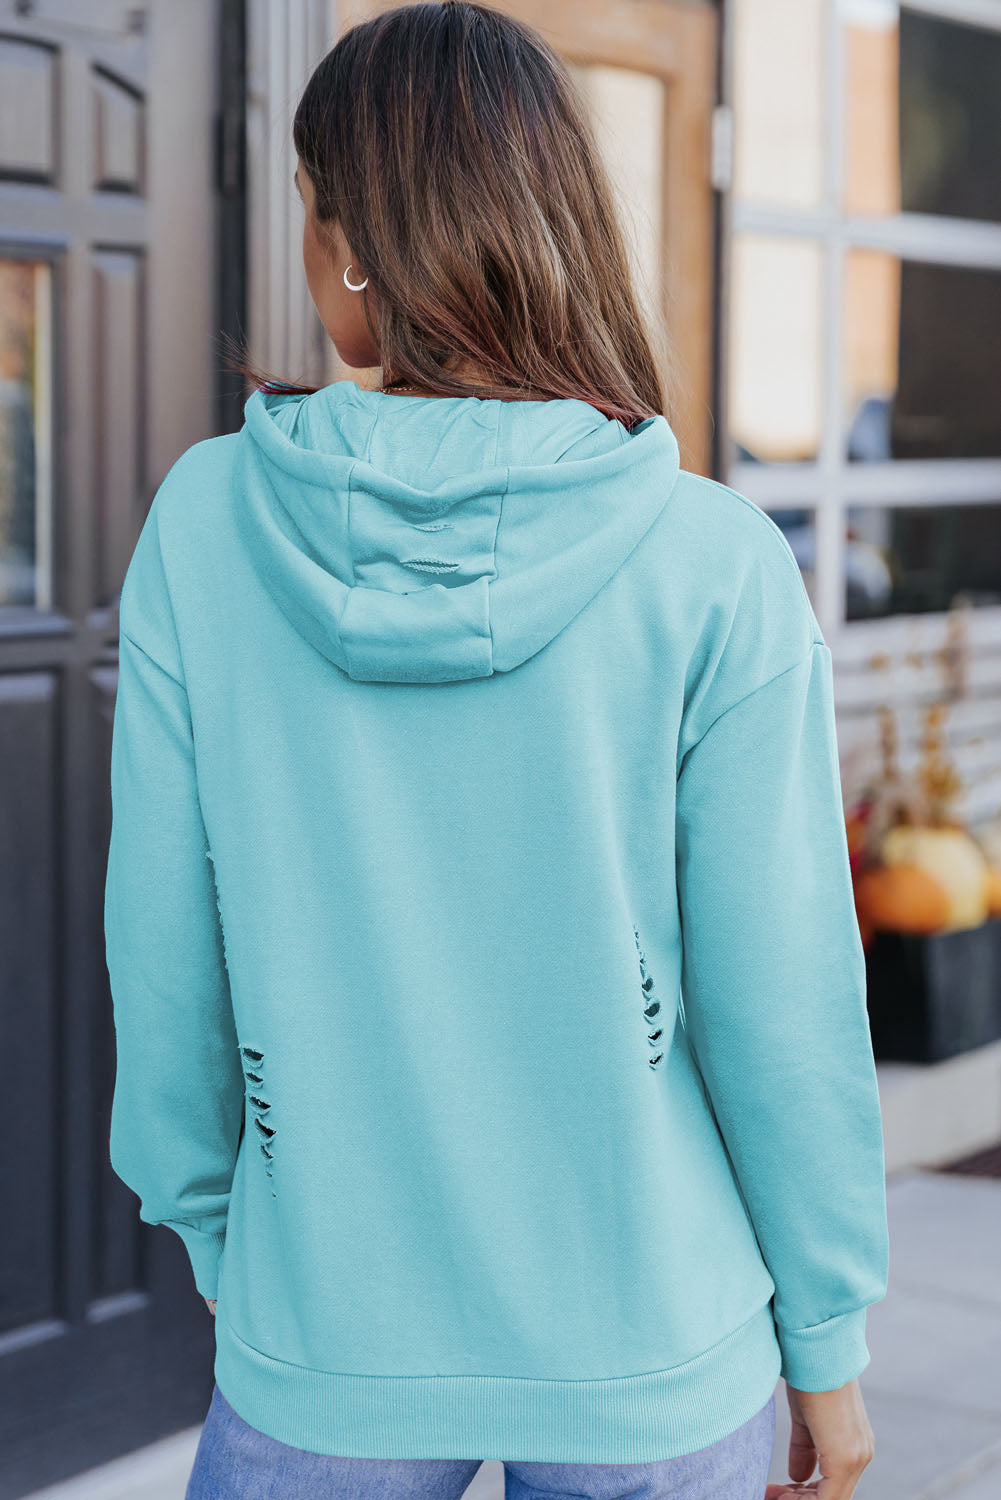 Cutout Dropped Shoulder Hoodie - Women’s Clothing & Accessories - Shirts & Tops - 9 - 2024